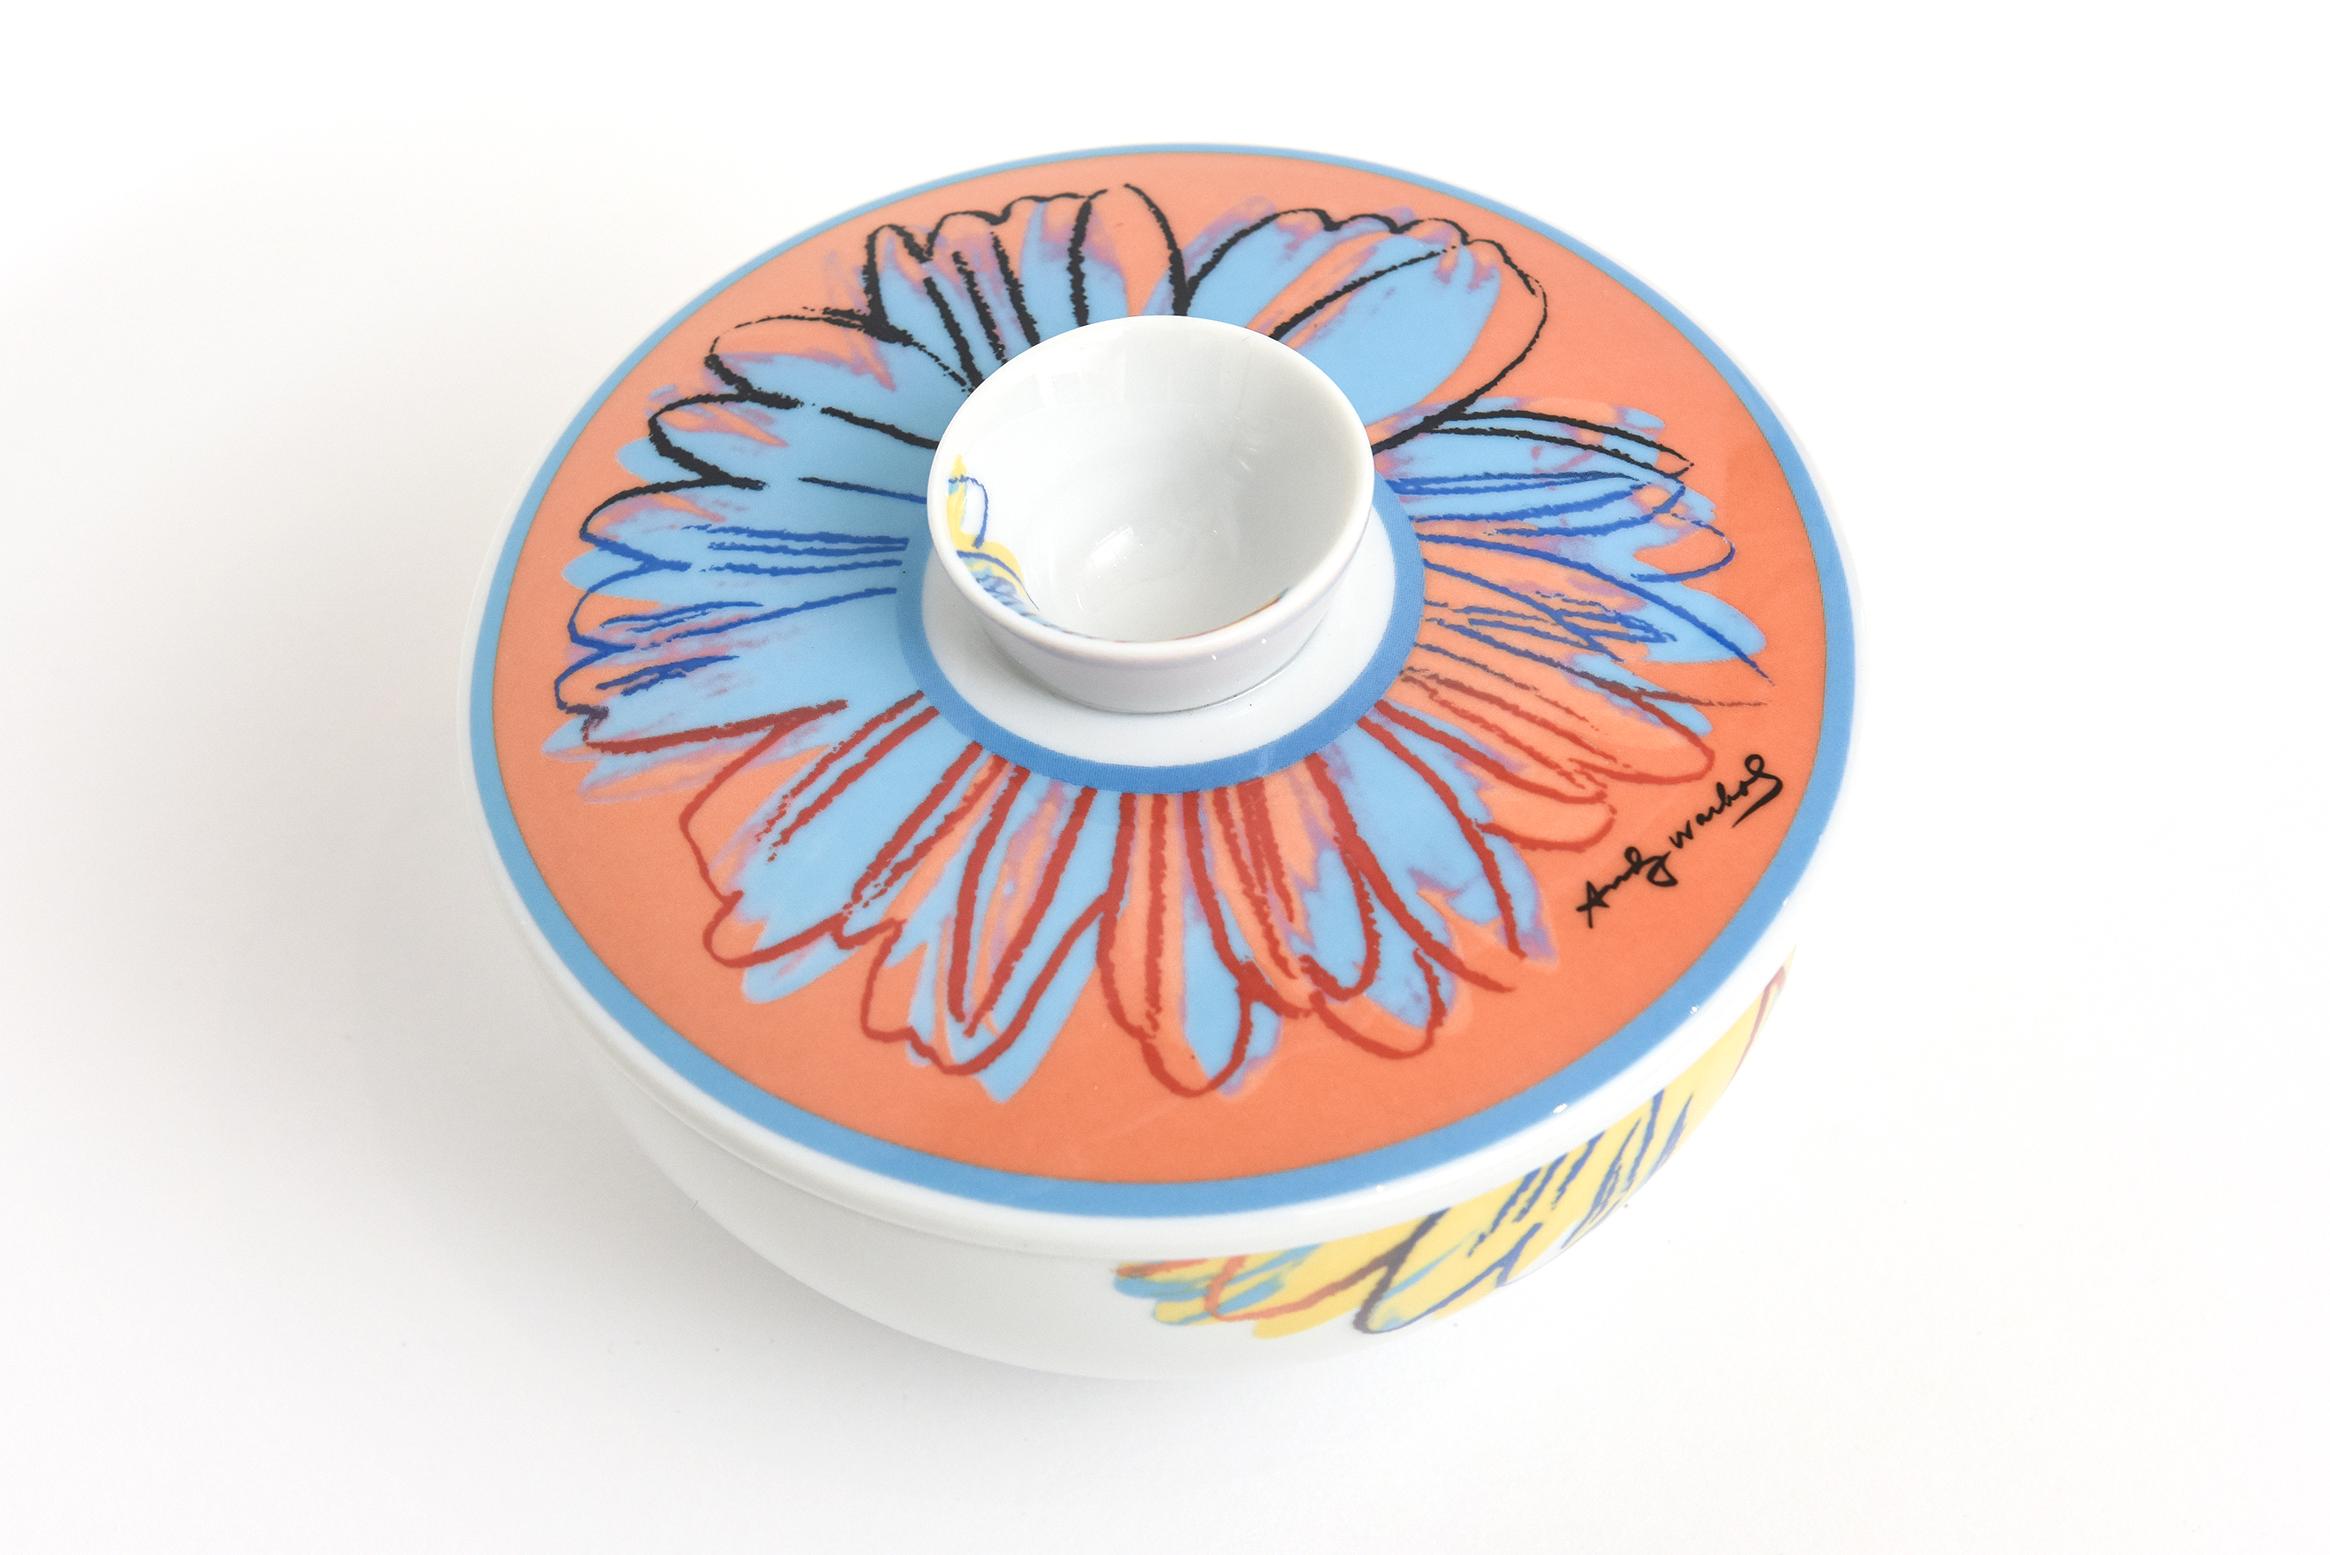 This always wonderful porcelain lidded Rosenthal Studio Line colorful flower sugar bowl or bowl is by a design after Andy Warhol. Signed Andy Warhol. The colors are happy in hues of orange, blue, yellow and red set against the white porcelain. From